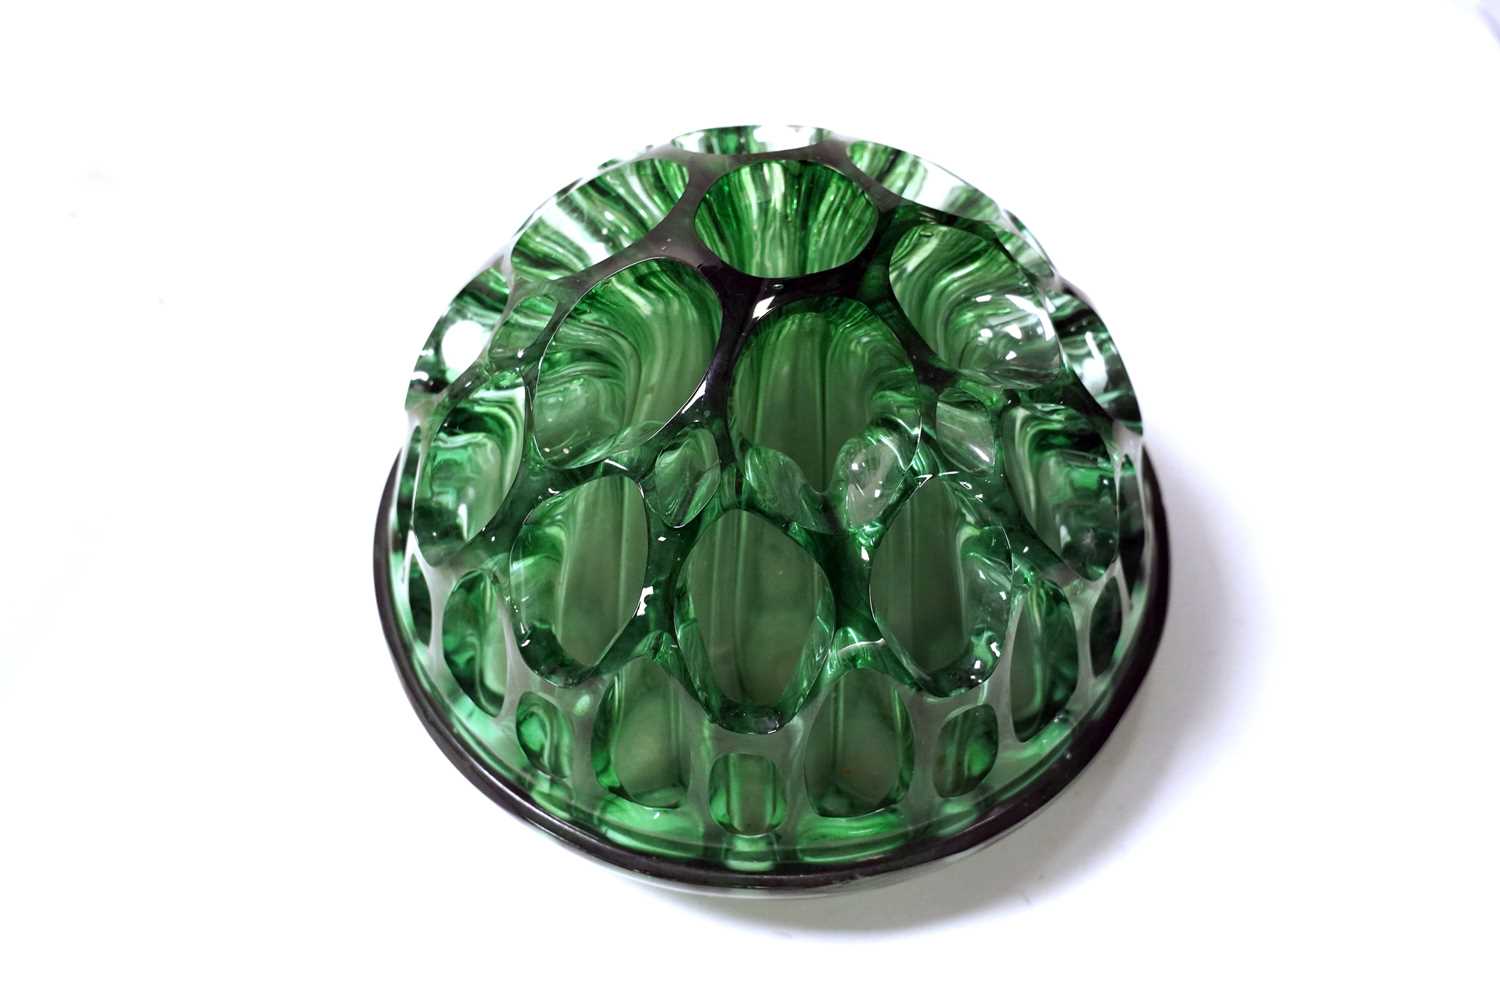 A 1930s George Davidson cloud glass bowl in green and a green glass rose bowl - Image 4 of 4